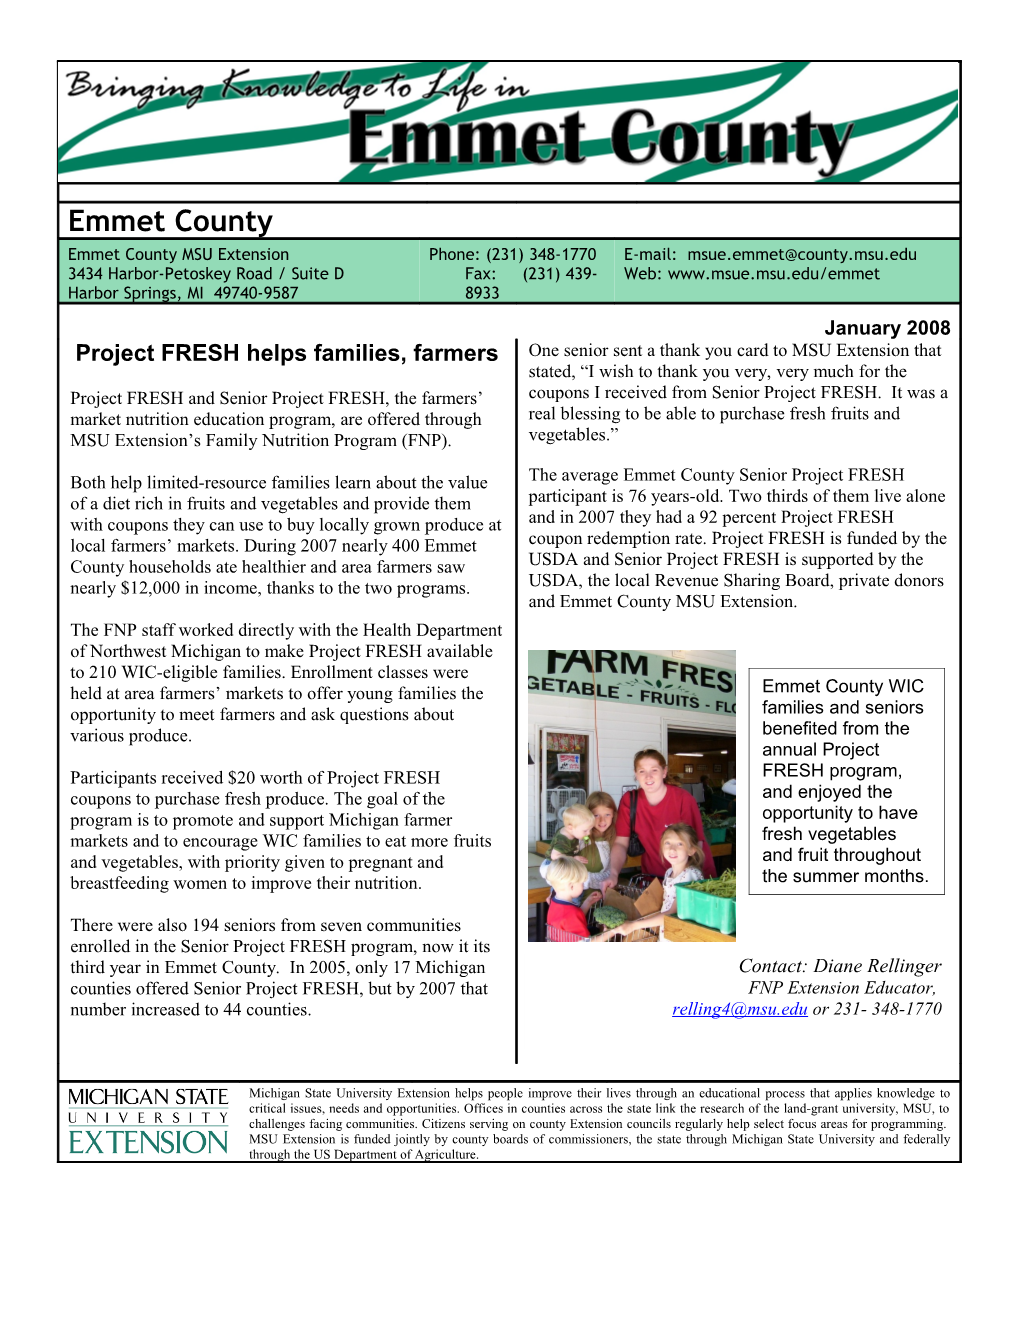 Project FRESH Helps Families, Farmers